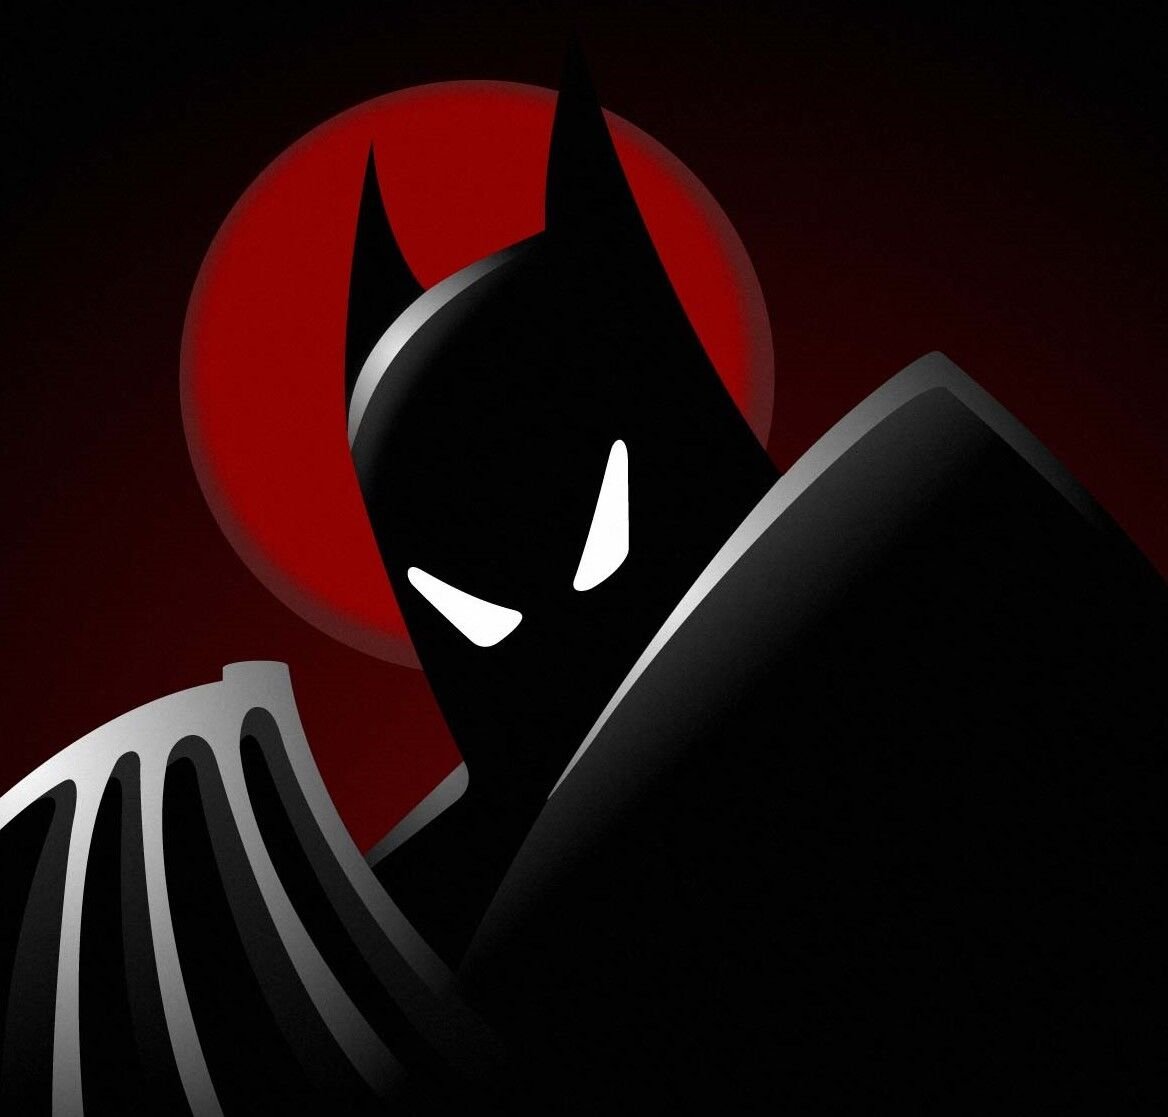 "I 'am the night." 


Kevin Conroy was Born Nov 30, 1955 and Passed Nov 10, 2022.


Contributed Photo